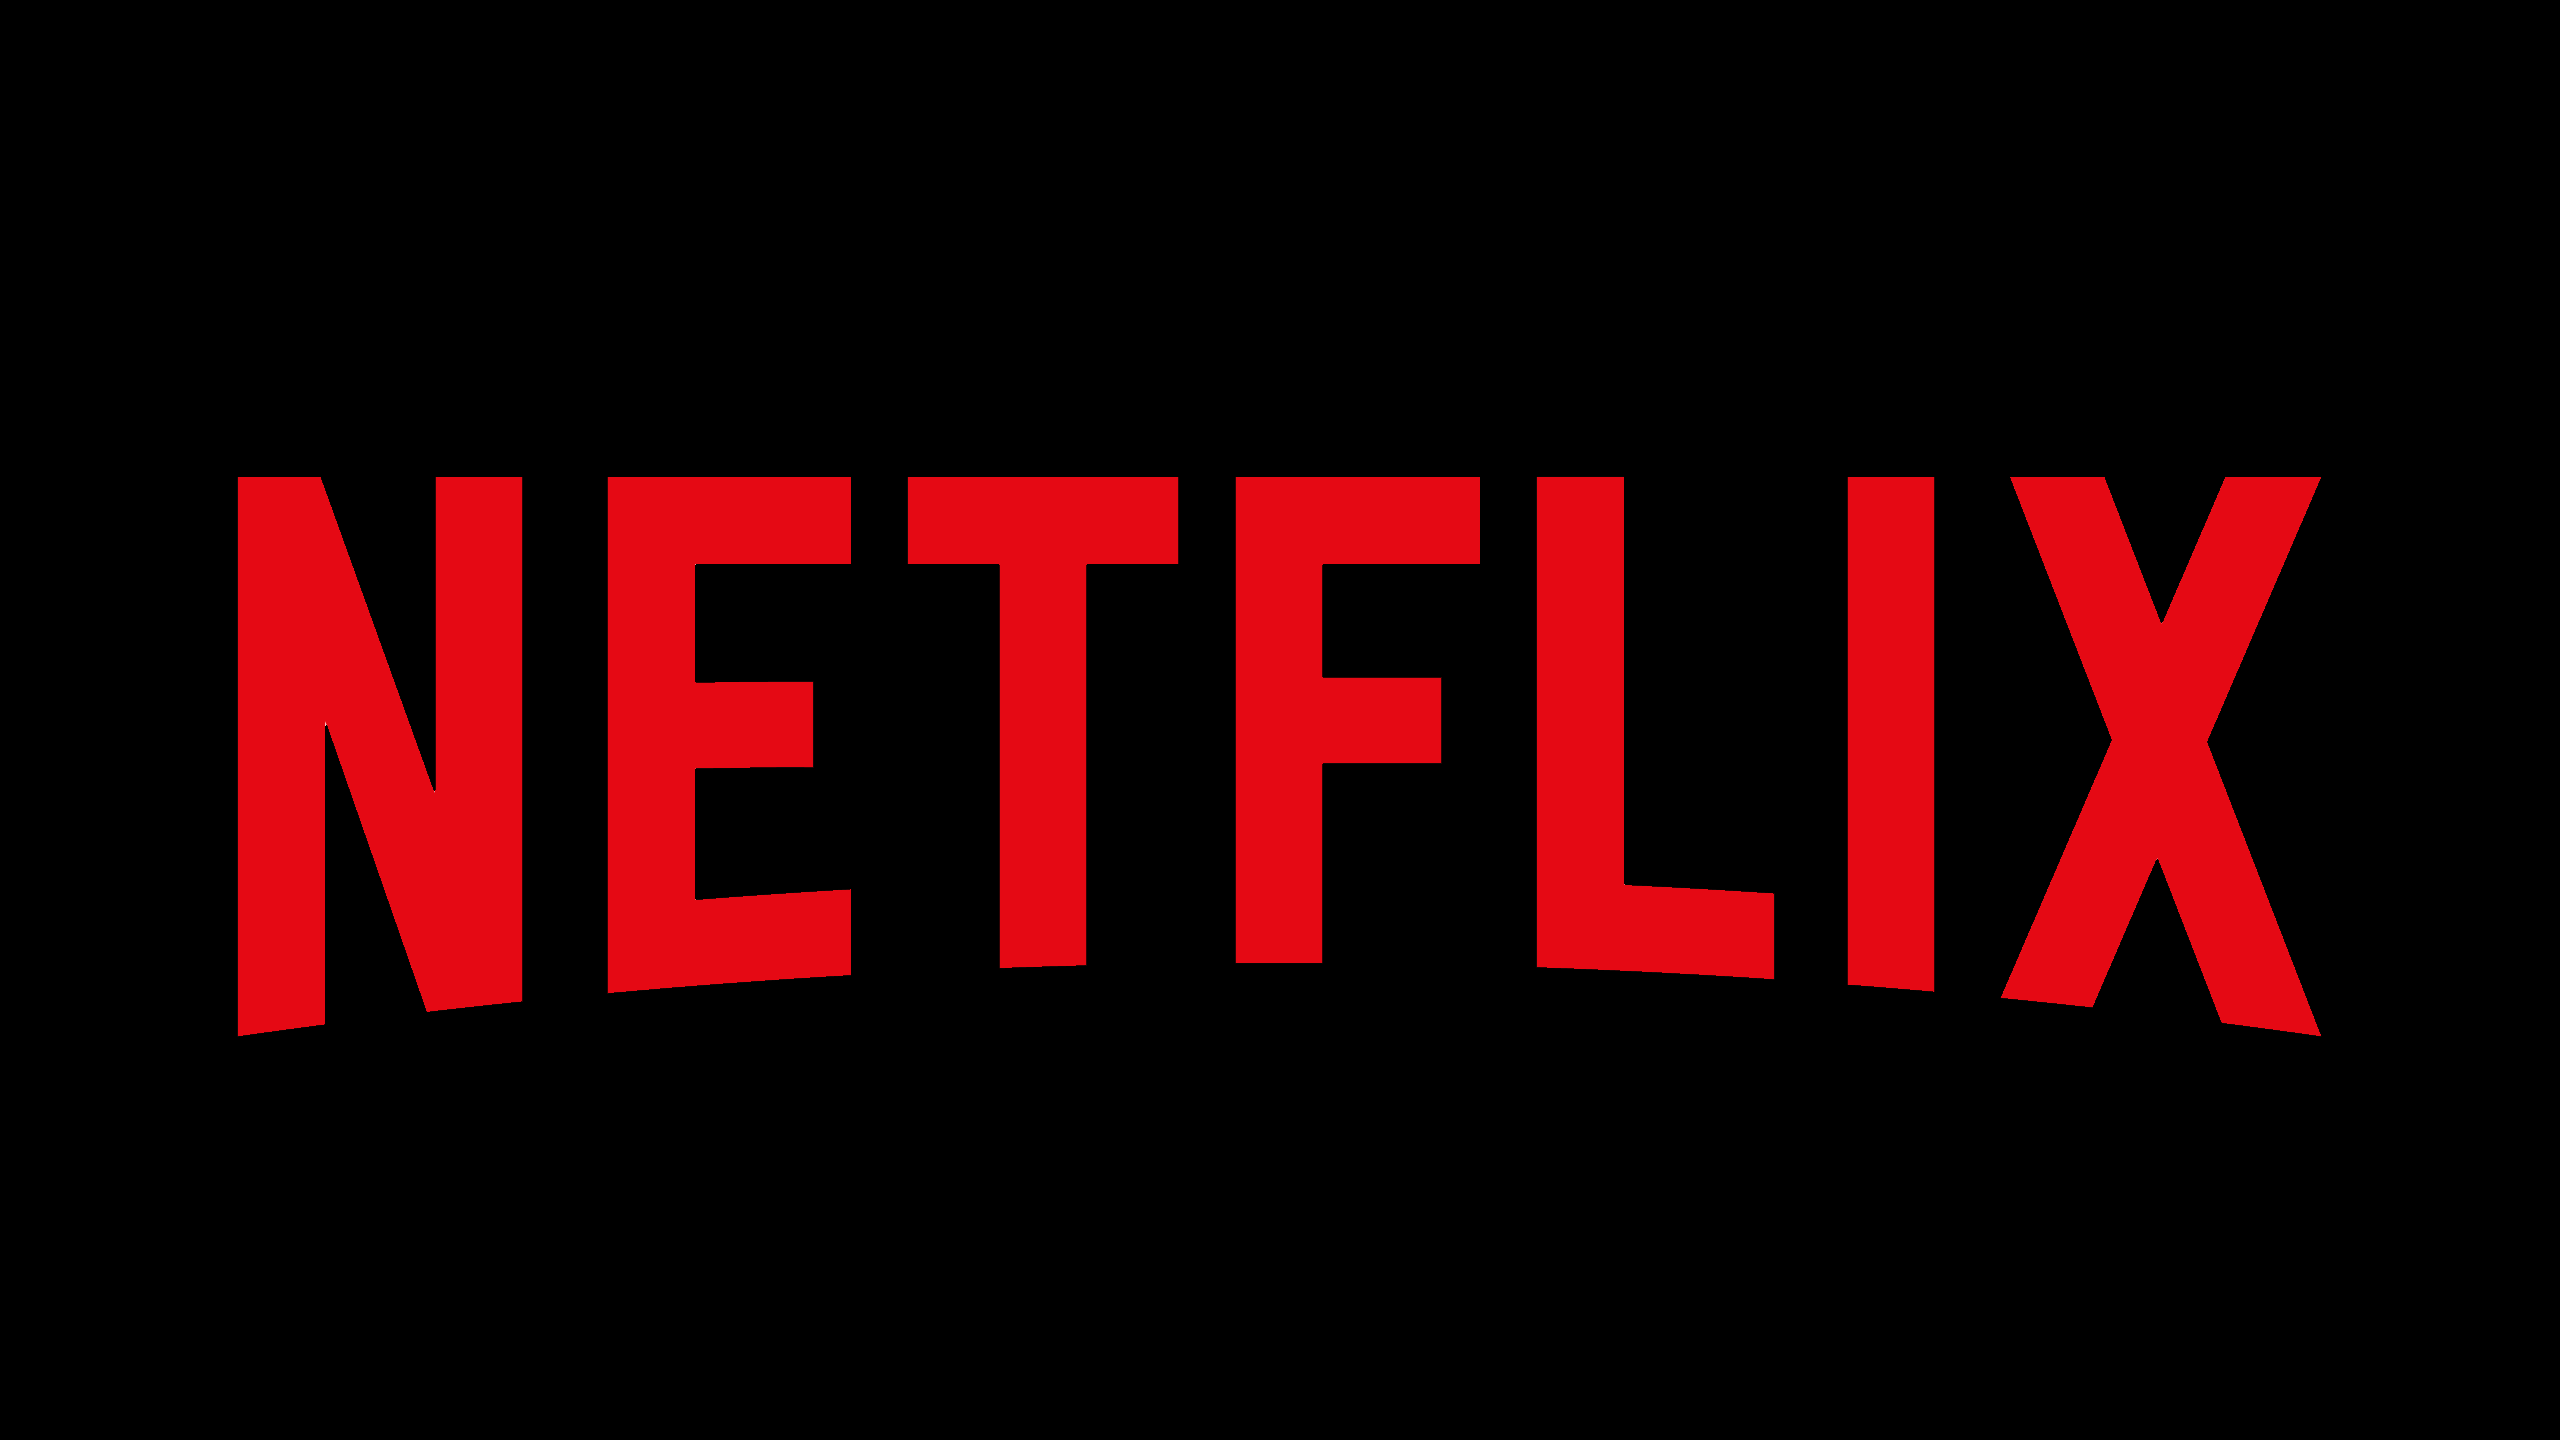 Netflix is looking to expand into the gaming market